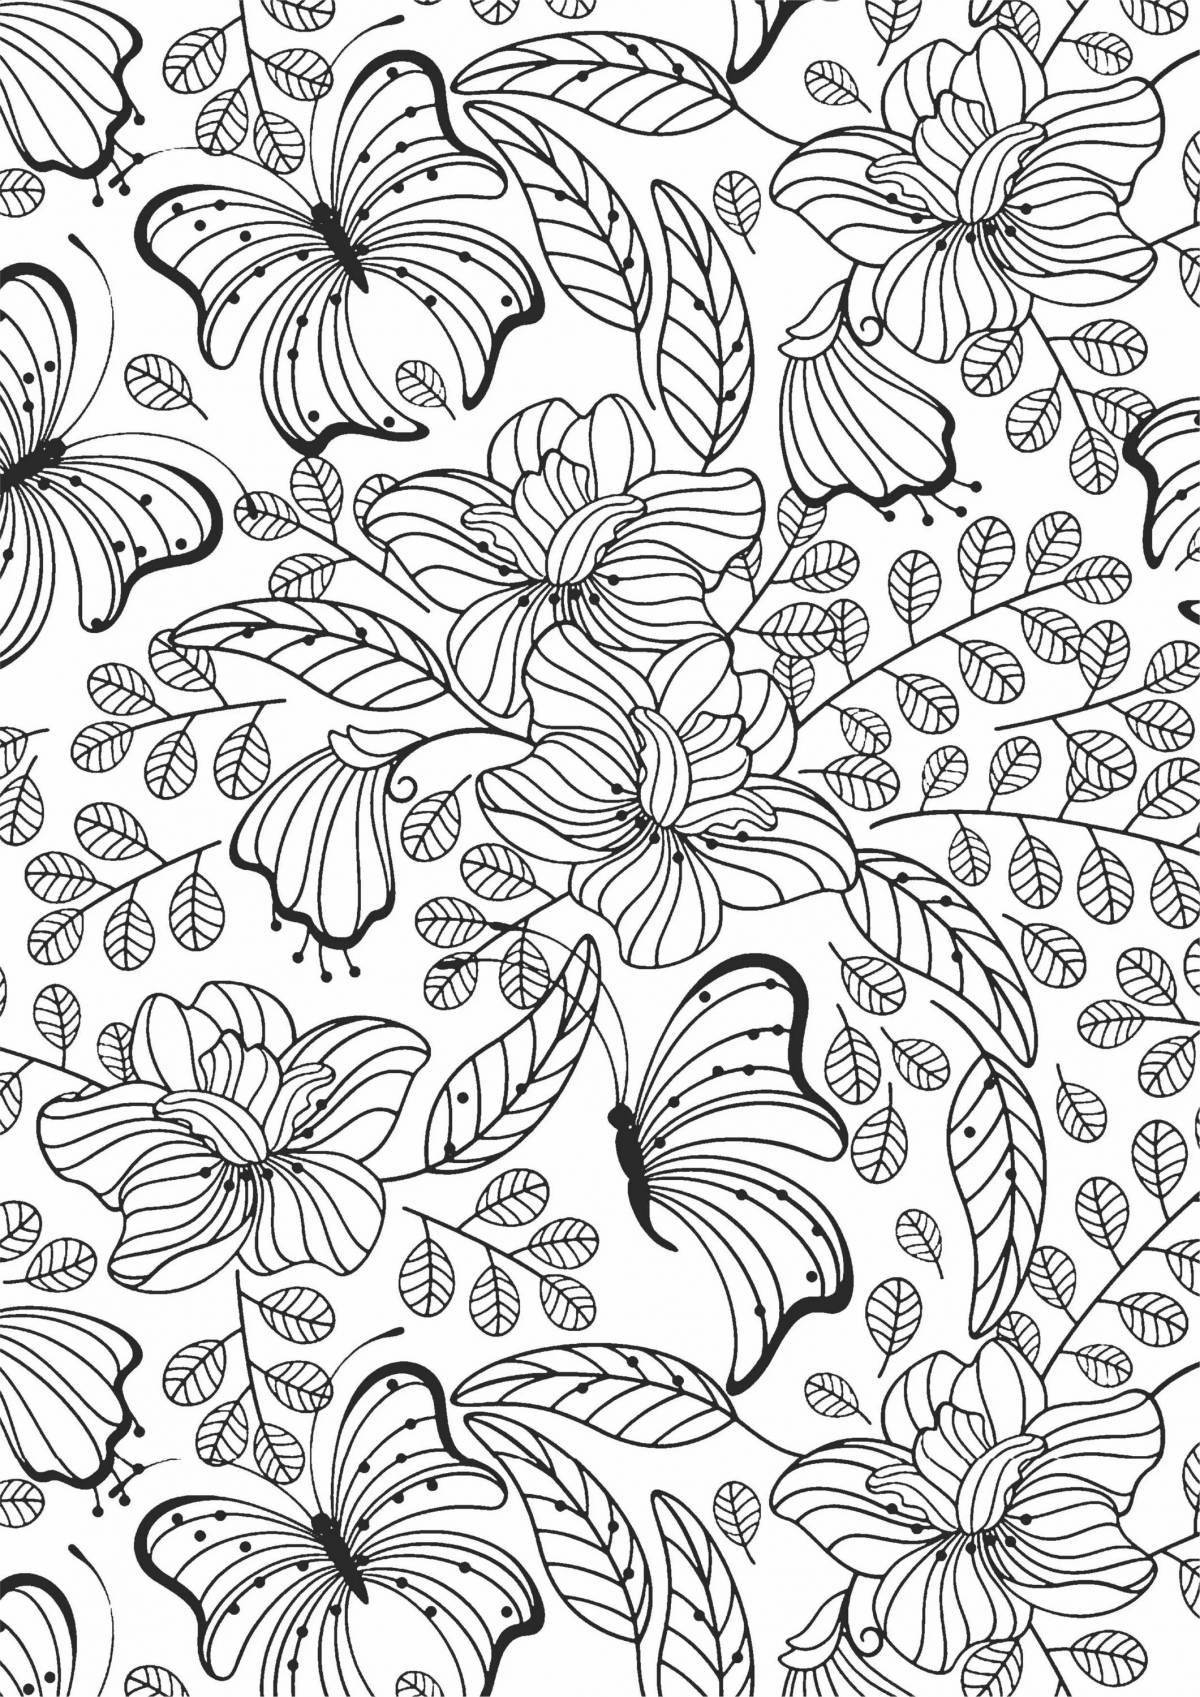 Amazing printable coloring book